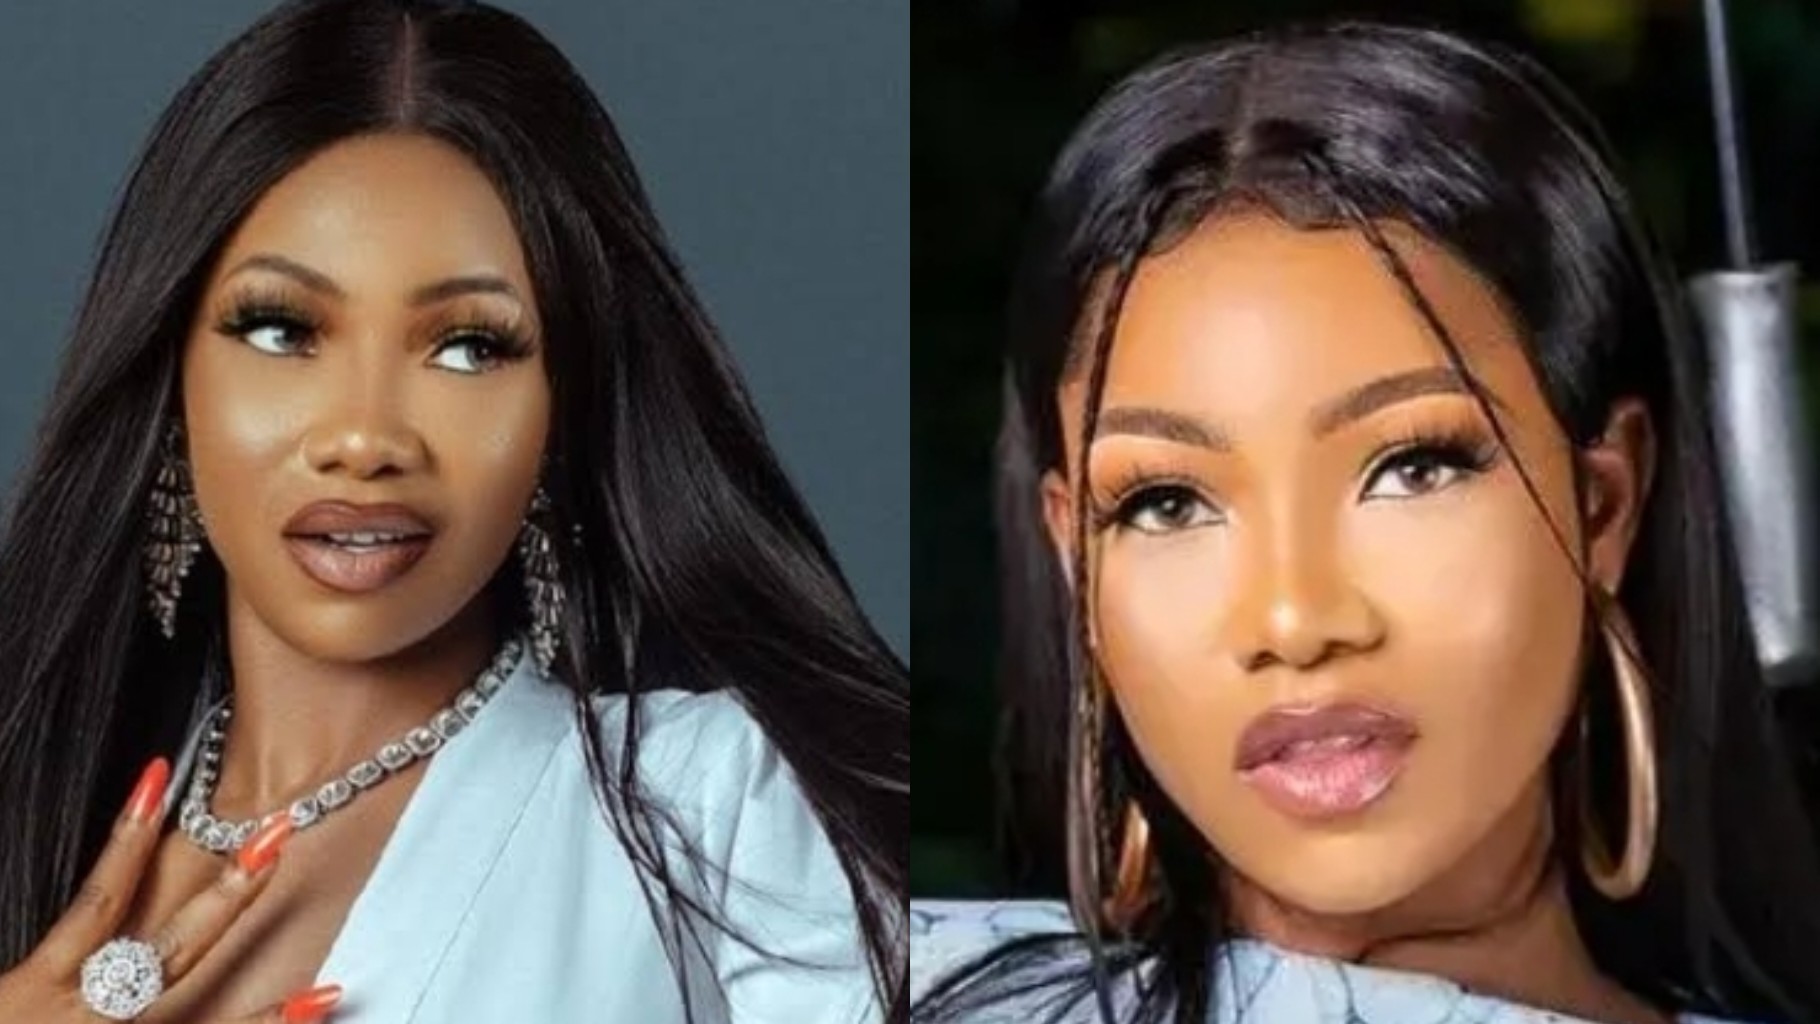 Fan humiliated by Tacha issues press release, demands public apology after waist-grip controversy